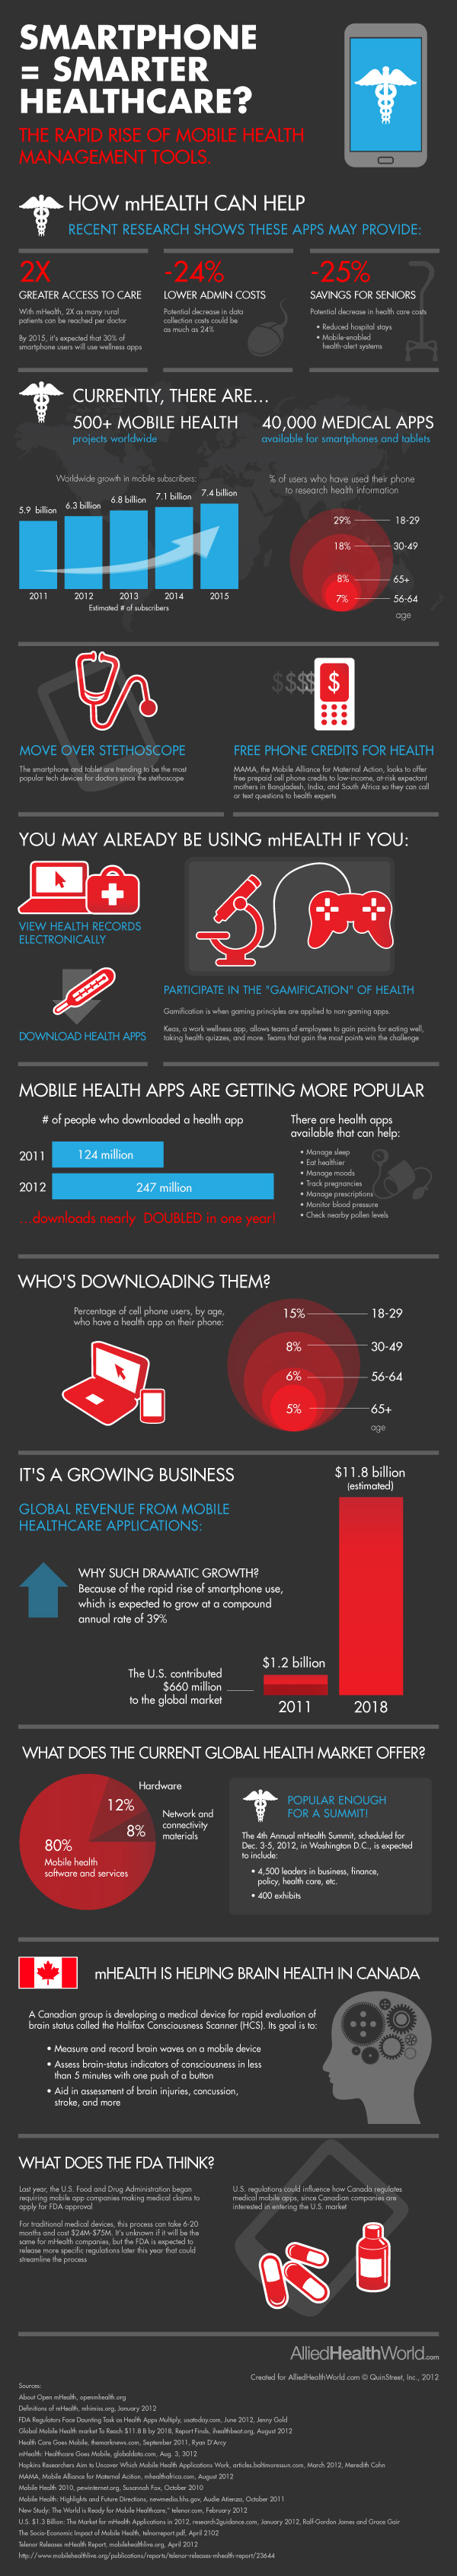 Smartphone in Healthcare-Infographic